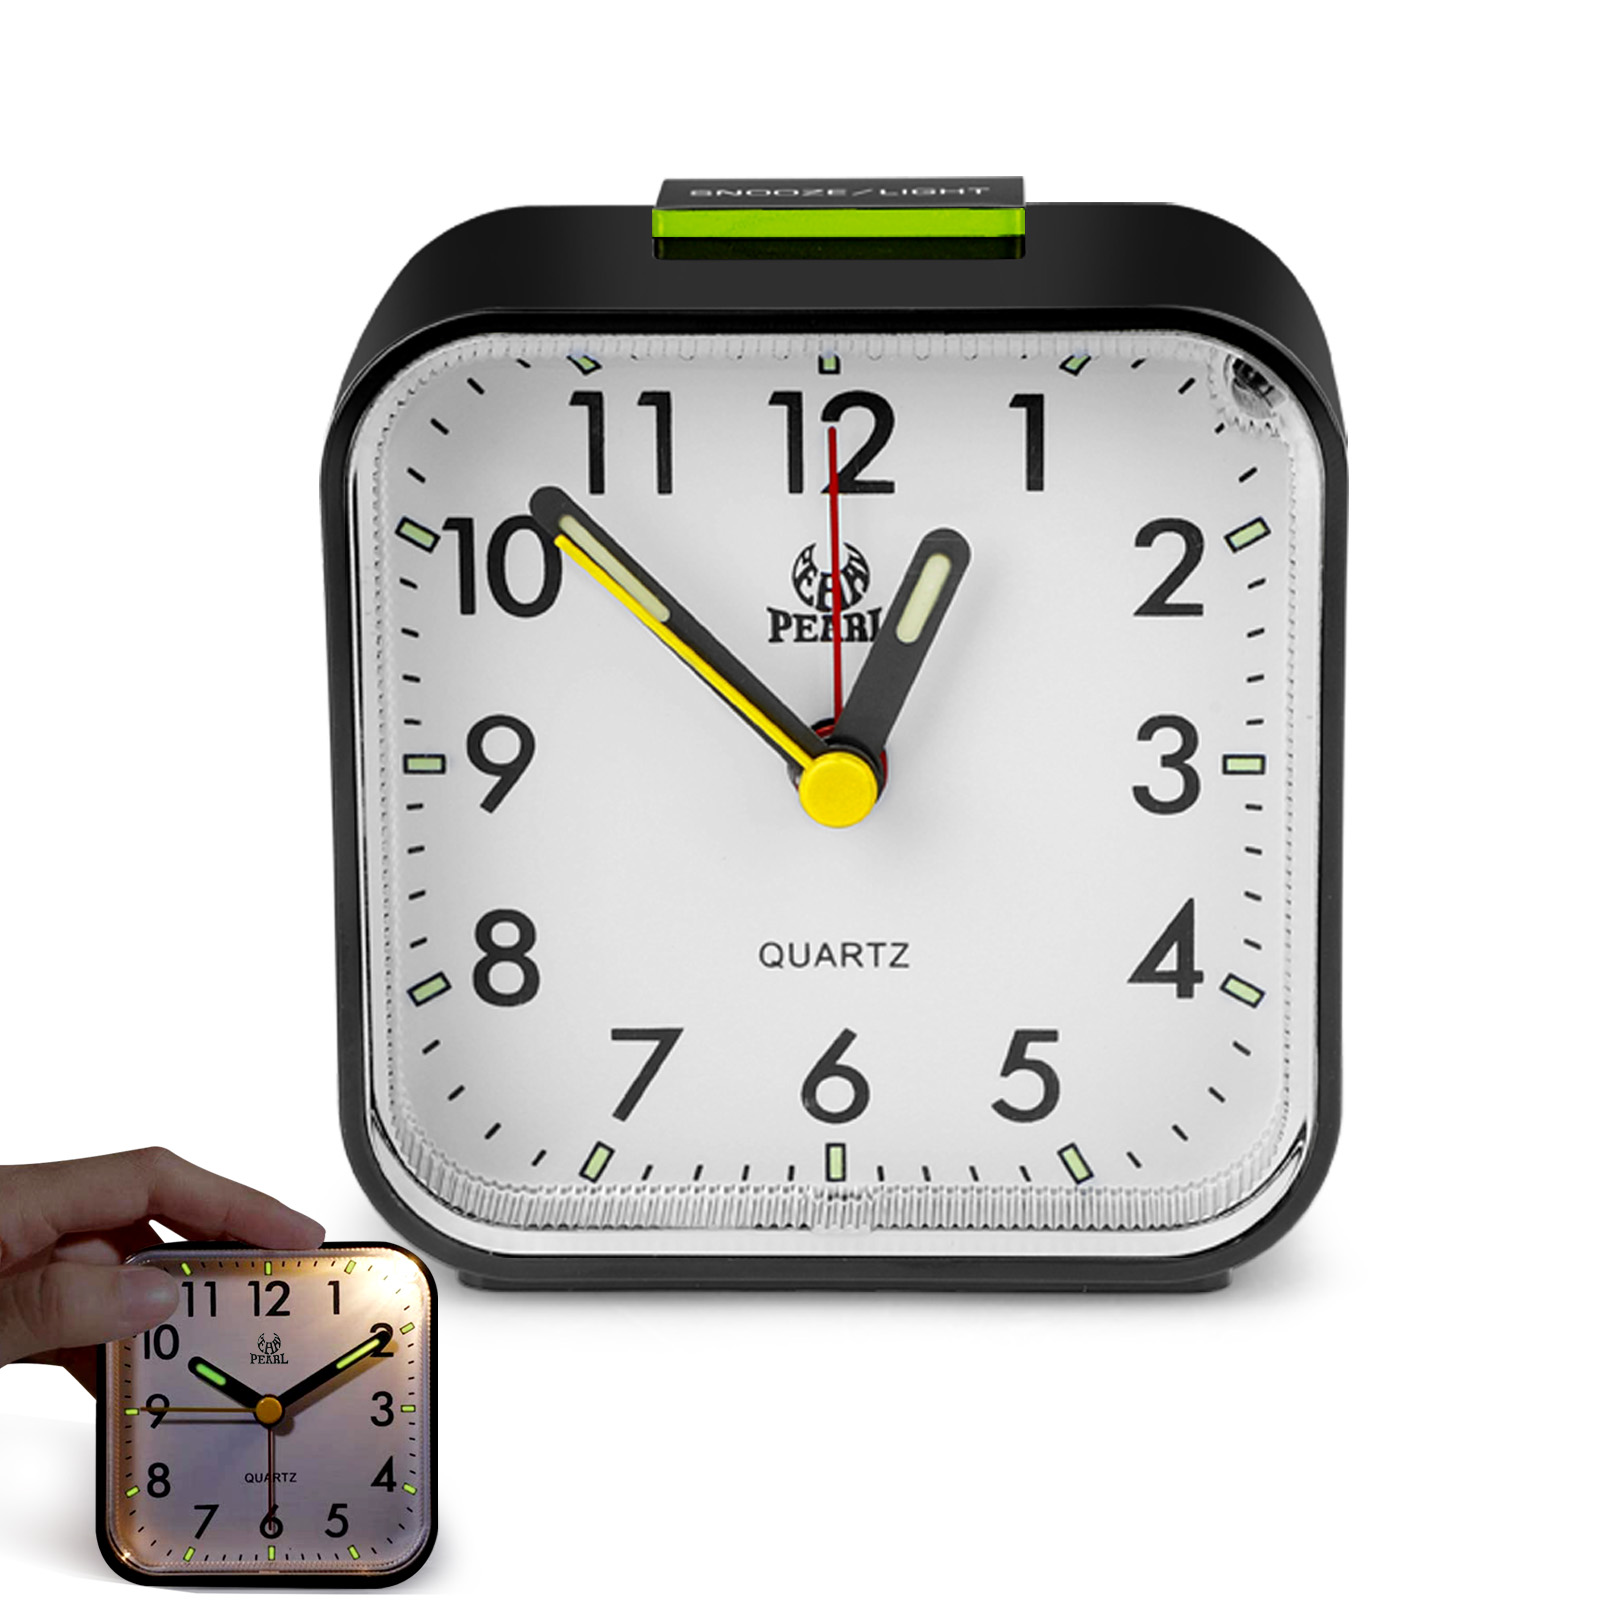 TSV Old-Fashioned Alarm Clock, Mini Battery Operated Analog Alarm Clock Square Travel Portable Alarm Clock, Compact & Lightweight Bedside Clock with Snooze Timed for Teenager, Elderly, Travelers - image 1 of 9